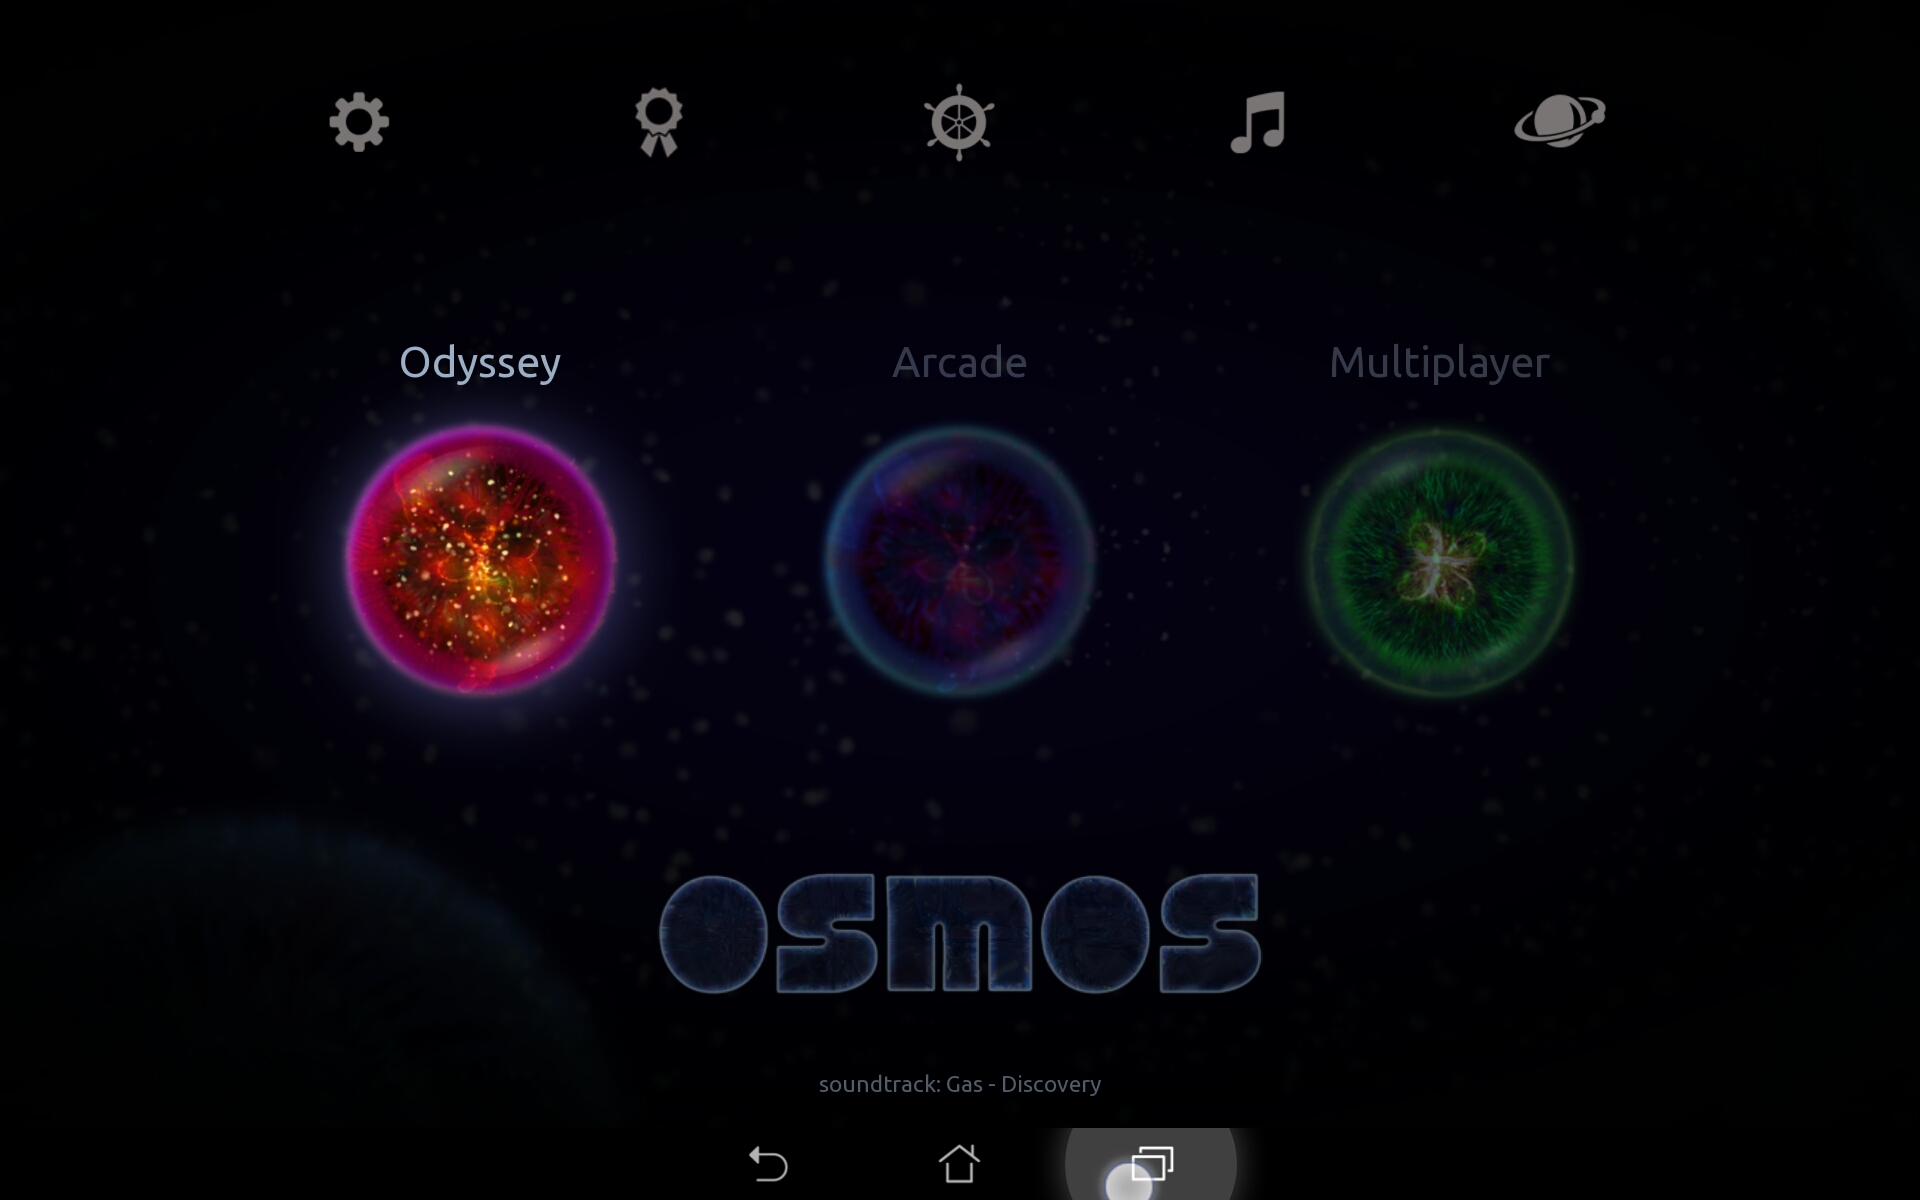 Osmos game start screenshot with 3 game mode options